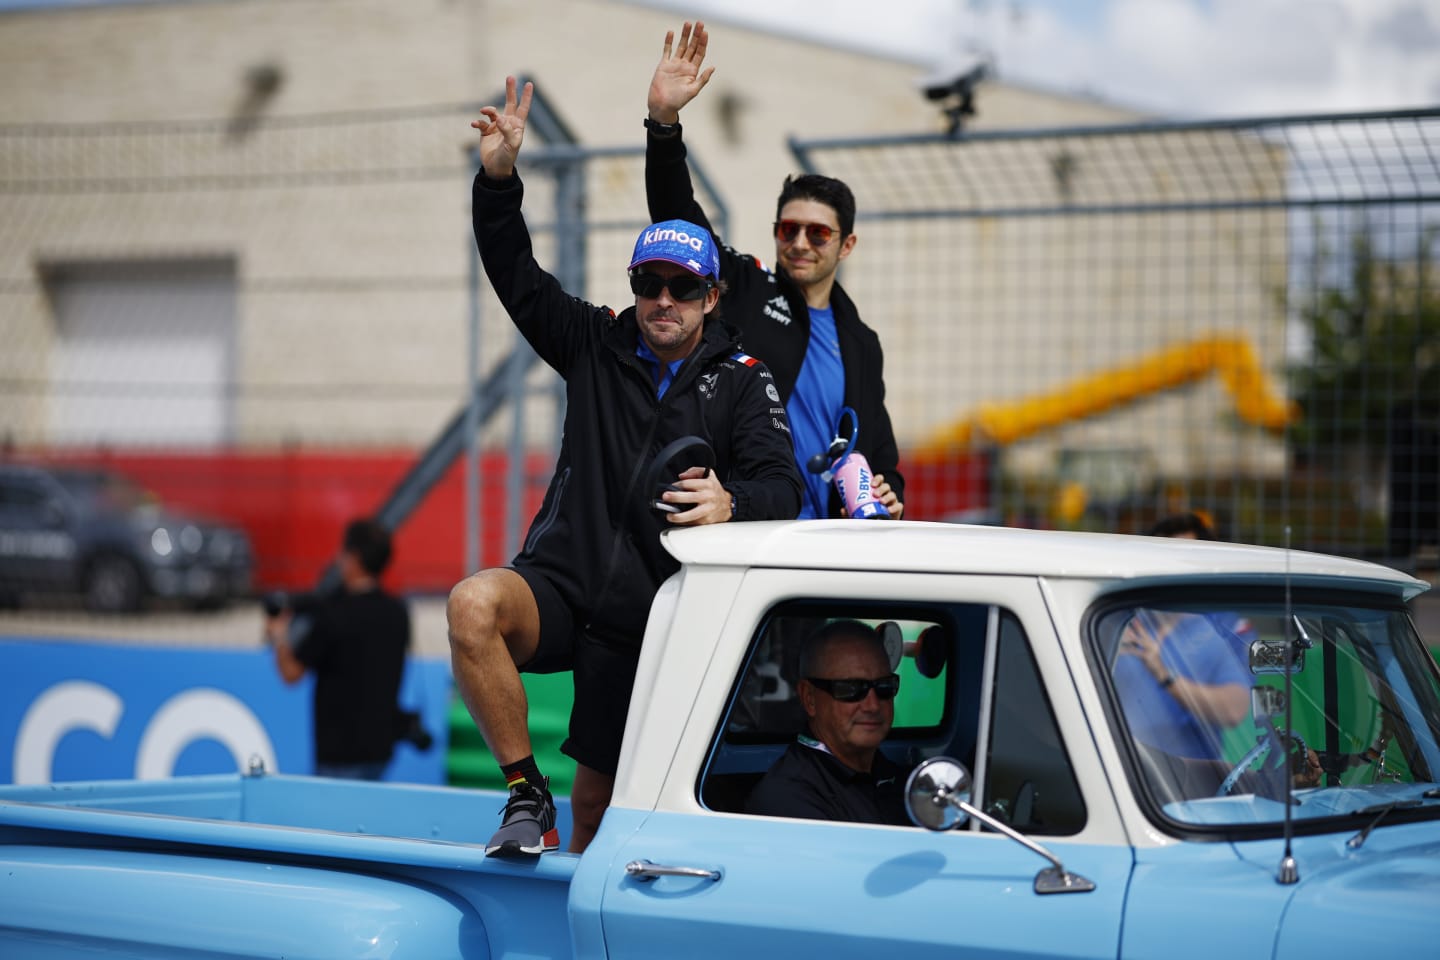 AUSTIN, TEXAS - OCTOBER 23: Fernando Alonso of Spain and Alpine F1 and Esteban Ocon of France and Alpine F1 wave to the crowd on the drivers parade prior to the F1 Grand Prix of USA at Circuit of The Americas on October 23, 2022 in Austin, Texas. (Photo by Chris Graythen/Getty Images)